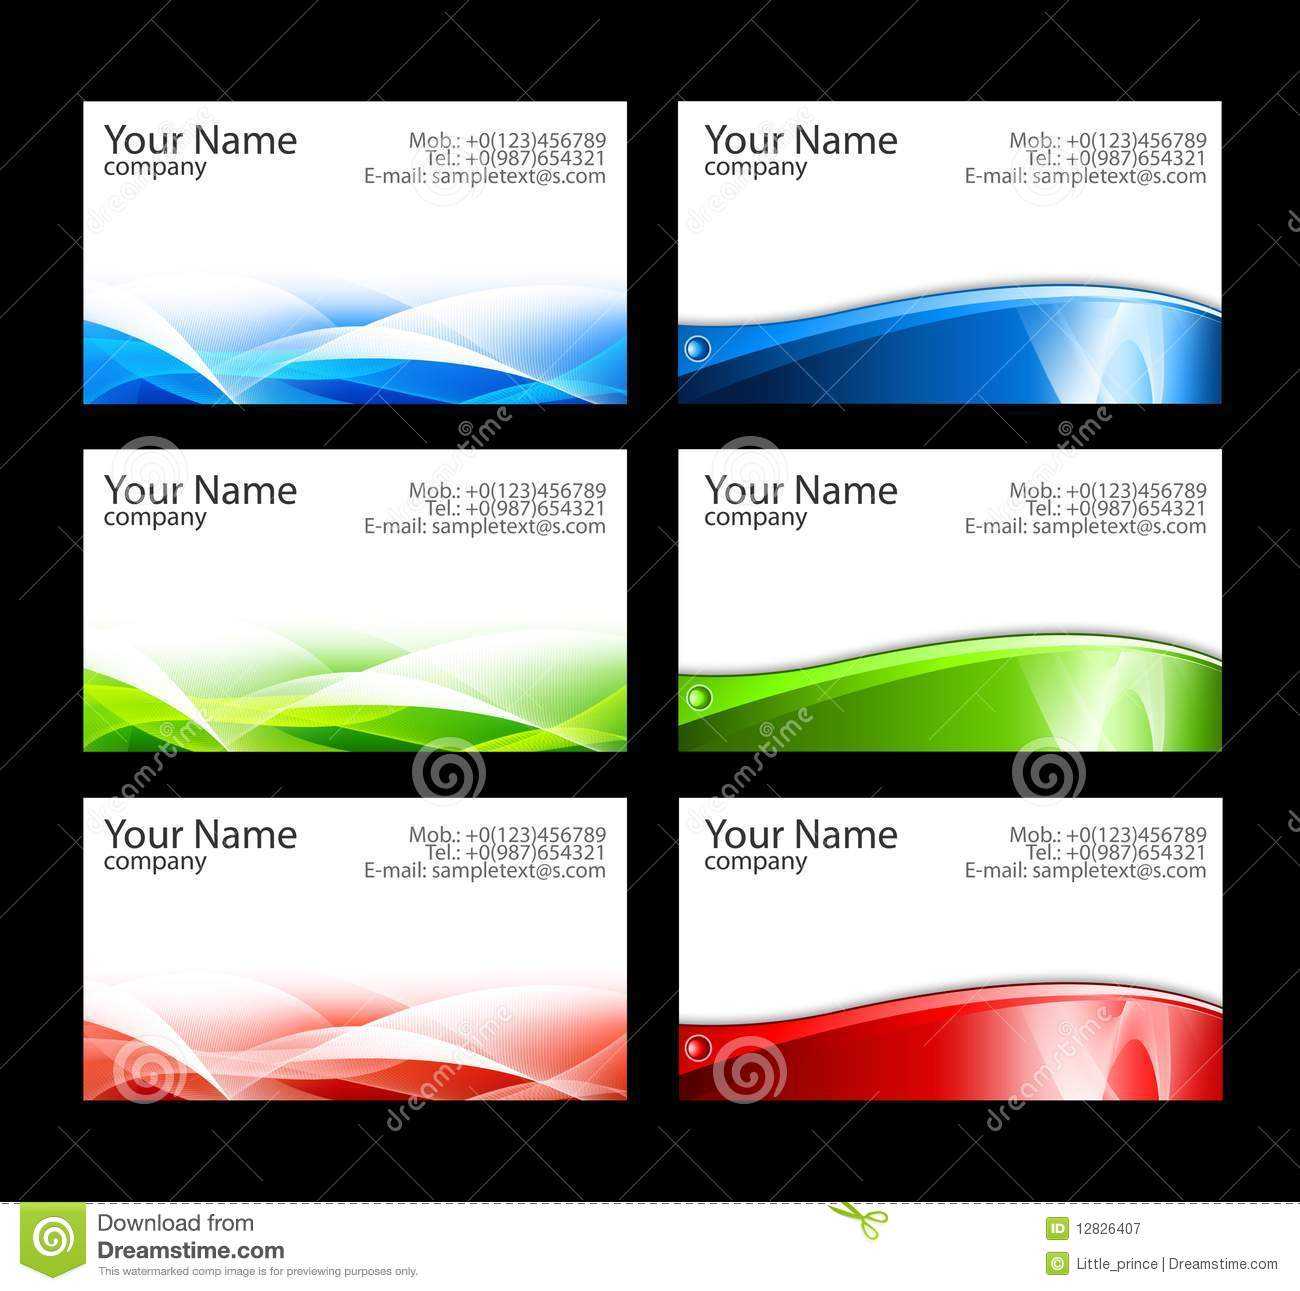 Business Cards Templates Stock Illustration. Illustration Of Intended For Free Business Cards Templates For Word